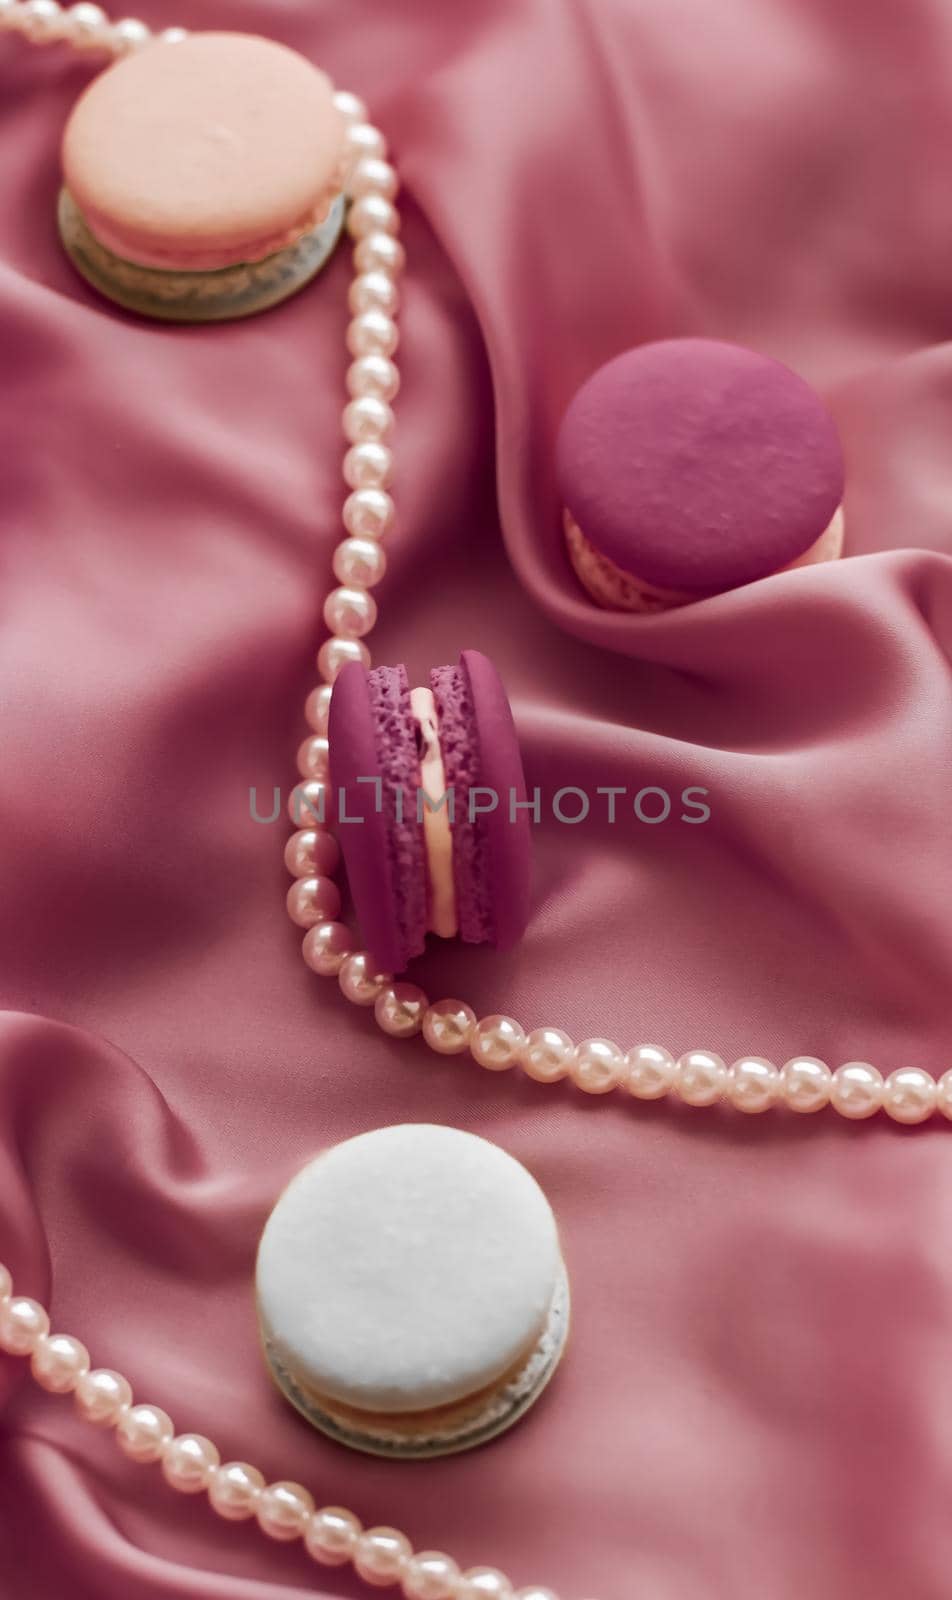 Girly, bakery and branding concept - Sweet macaroons and pearls jewellery on silk background, parisian chic jewelry, French dessert food and cake macaron for luxury confectionery brand, holiday gift